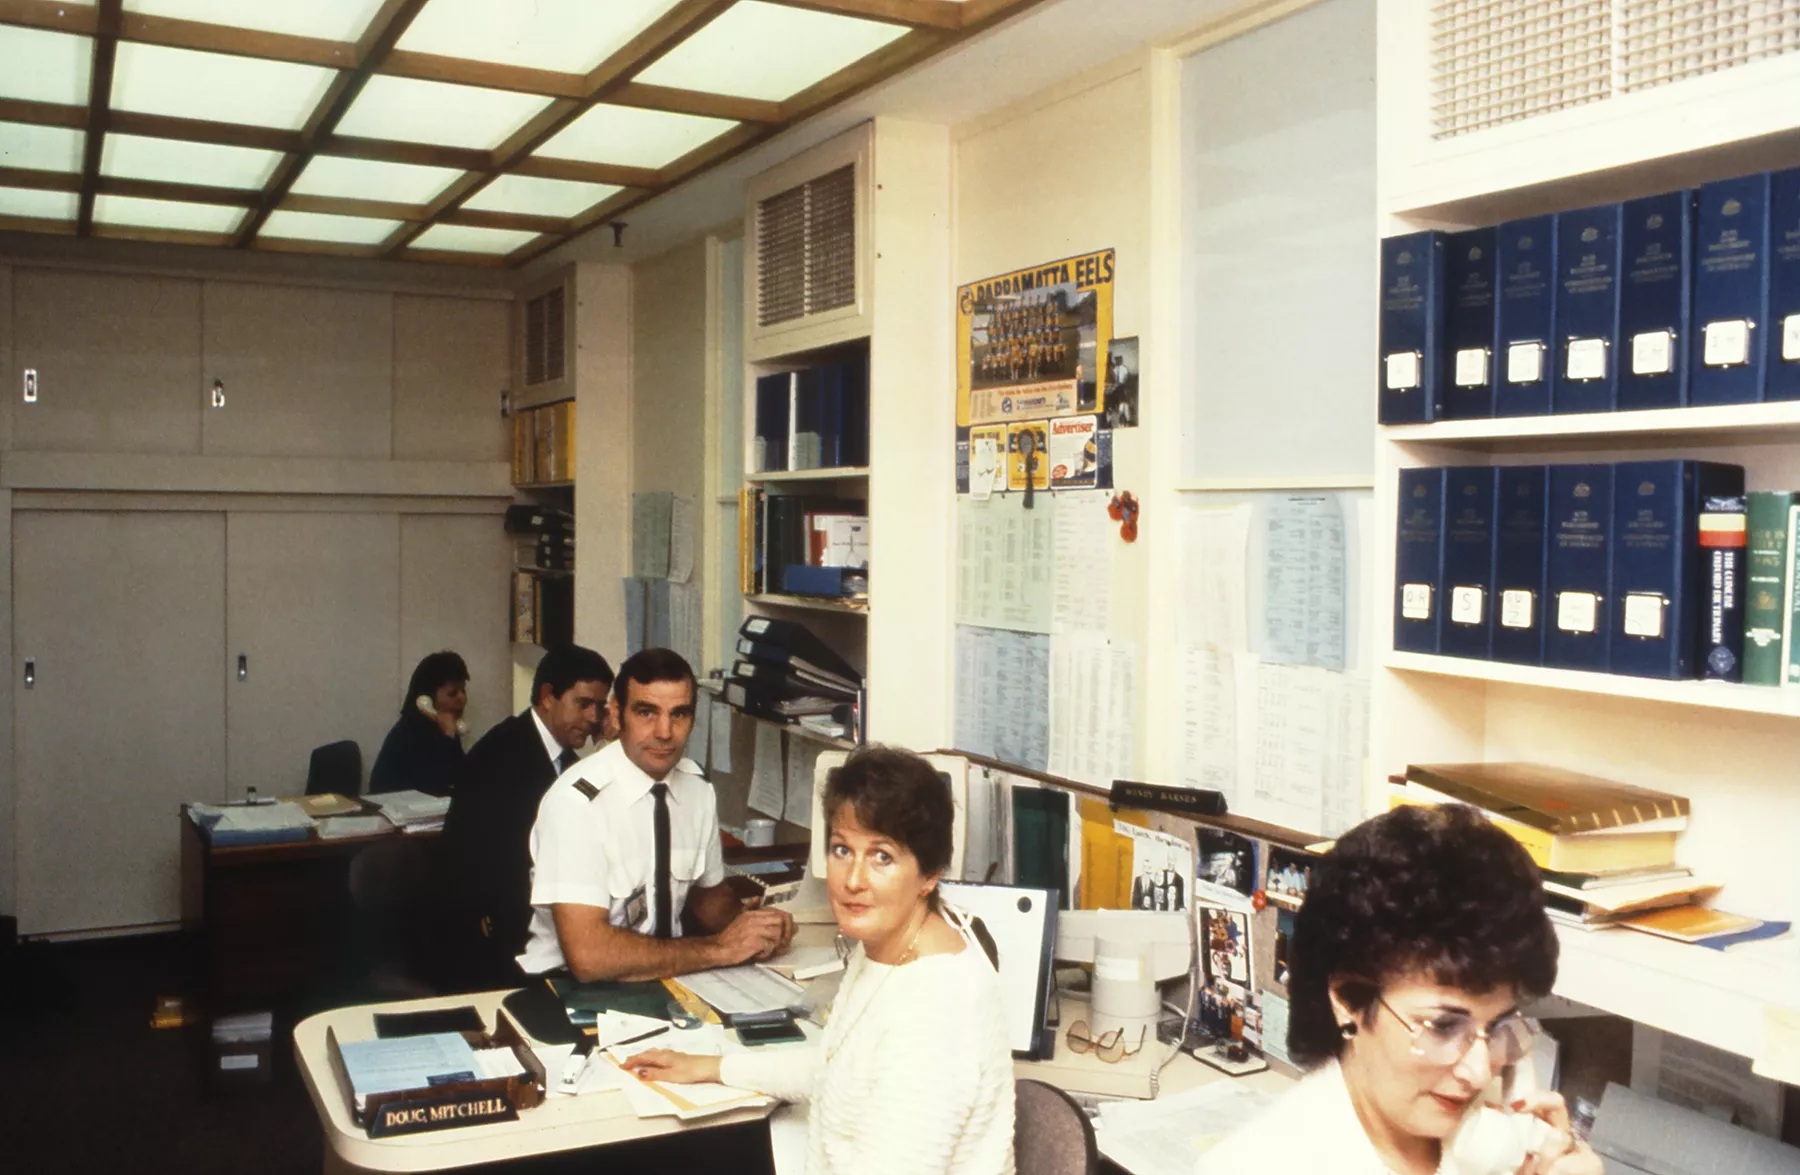 This professional colour photograph shows a busy and crowded open plan office in the Speaker’s Suite in 1988 – just a few months before parliament moved to Australian Parliament House. All five desks are occupied with Private Secretary Koula Alexiadis, Principal Private Secretary John Porter, Attendant Doug Mitchell, Assistant Private Secretary Wendy Barnes and Bookings Officer Marie Donnelly. Koula, John and Marie are all on the telephone while Doug and Wendy smile at the camera.